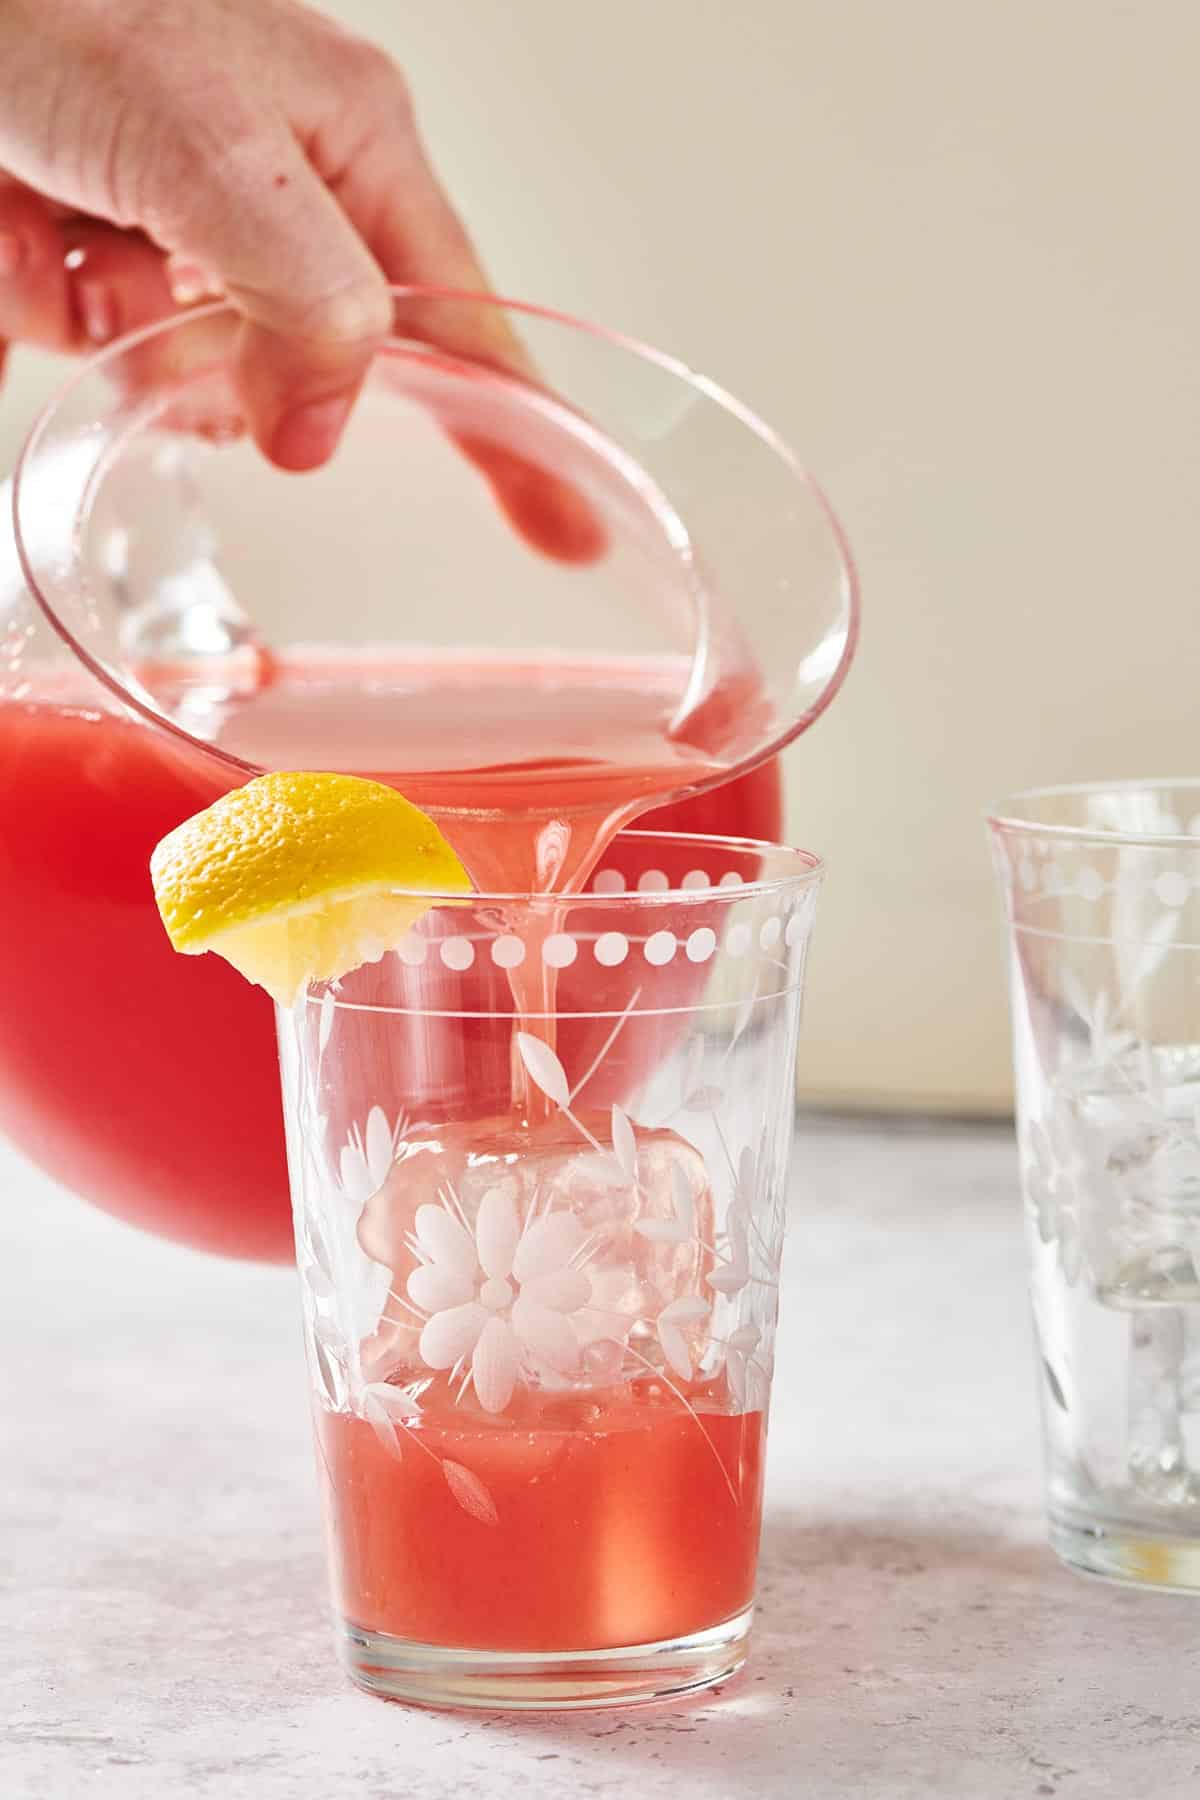 Pouring homemade watermelon lemonade into ice-filled glass with lemon wedge.